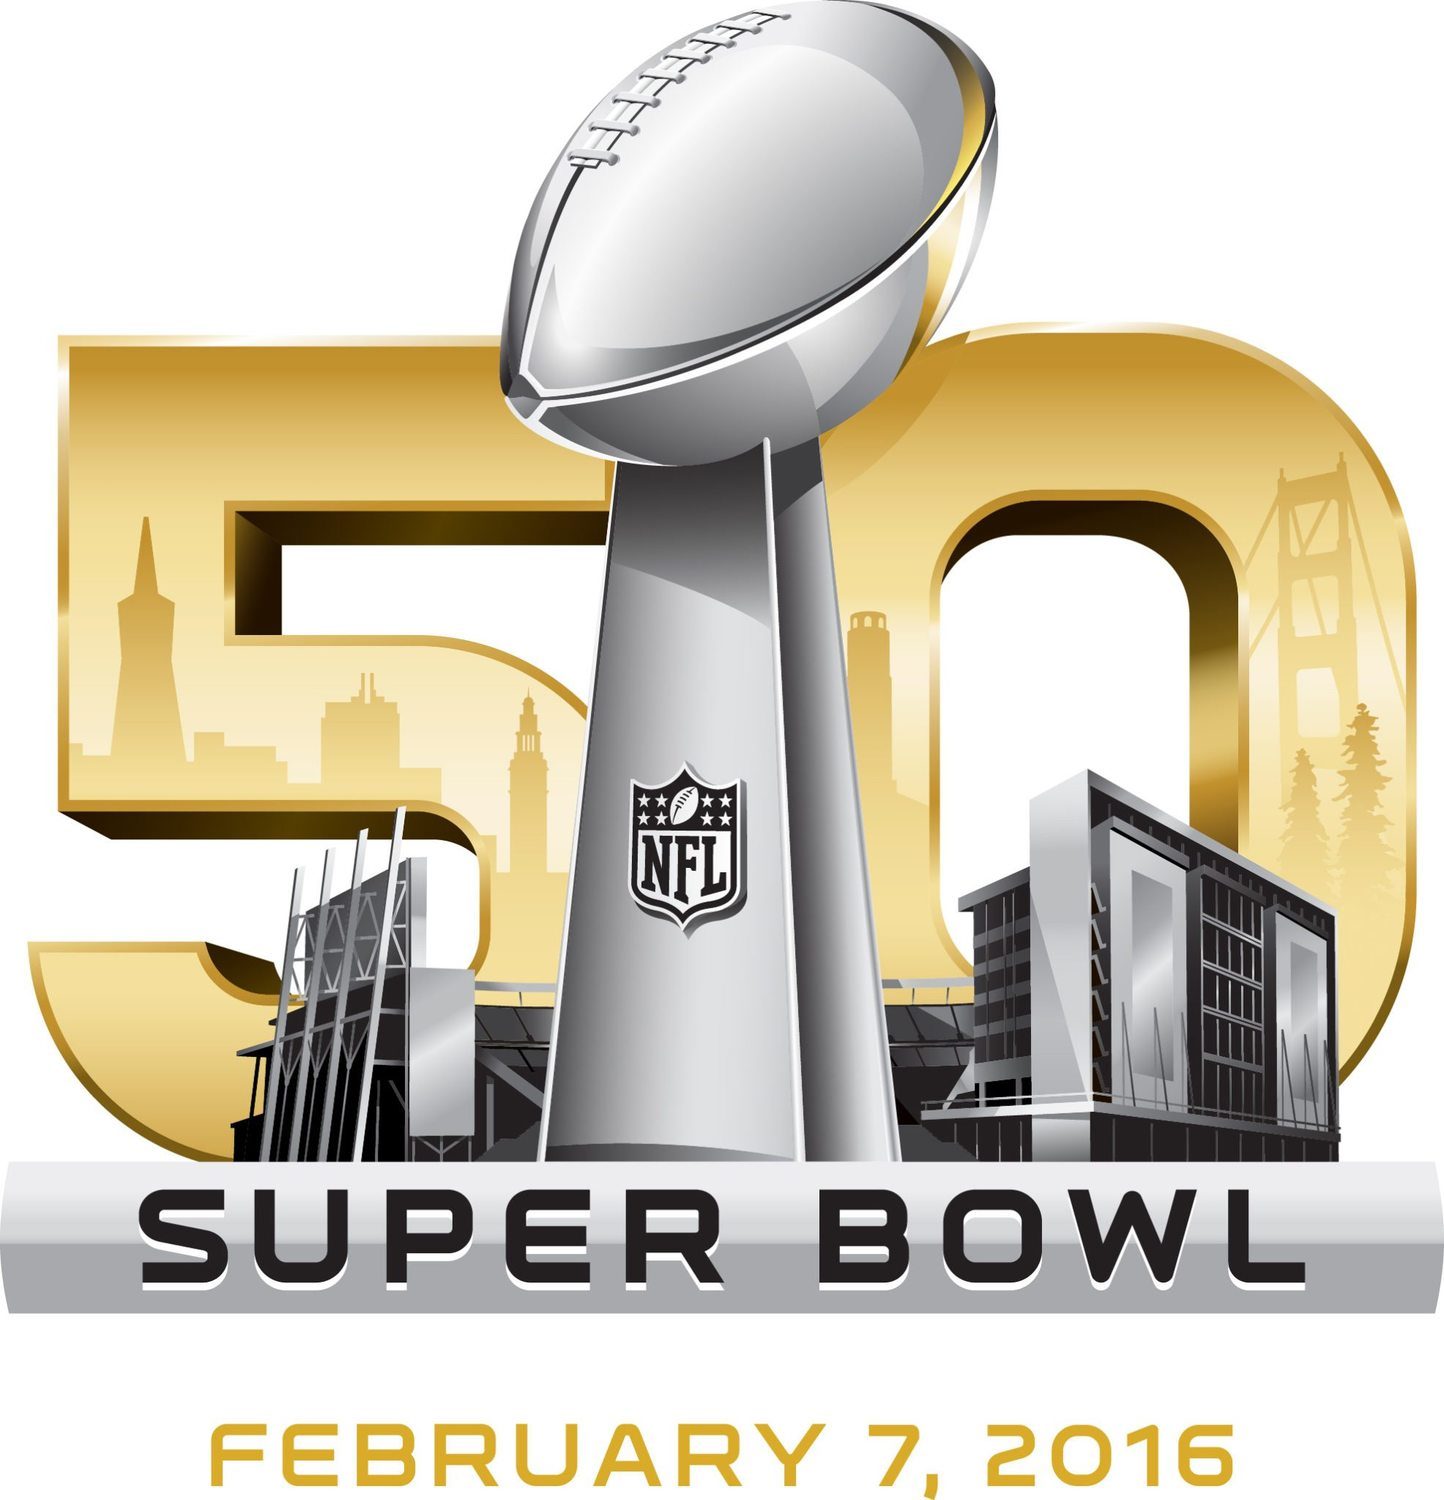 The Super Bowl 50 Workout!